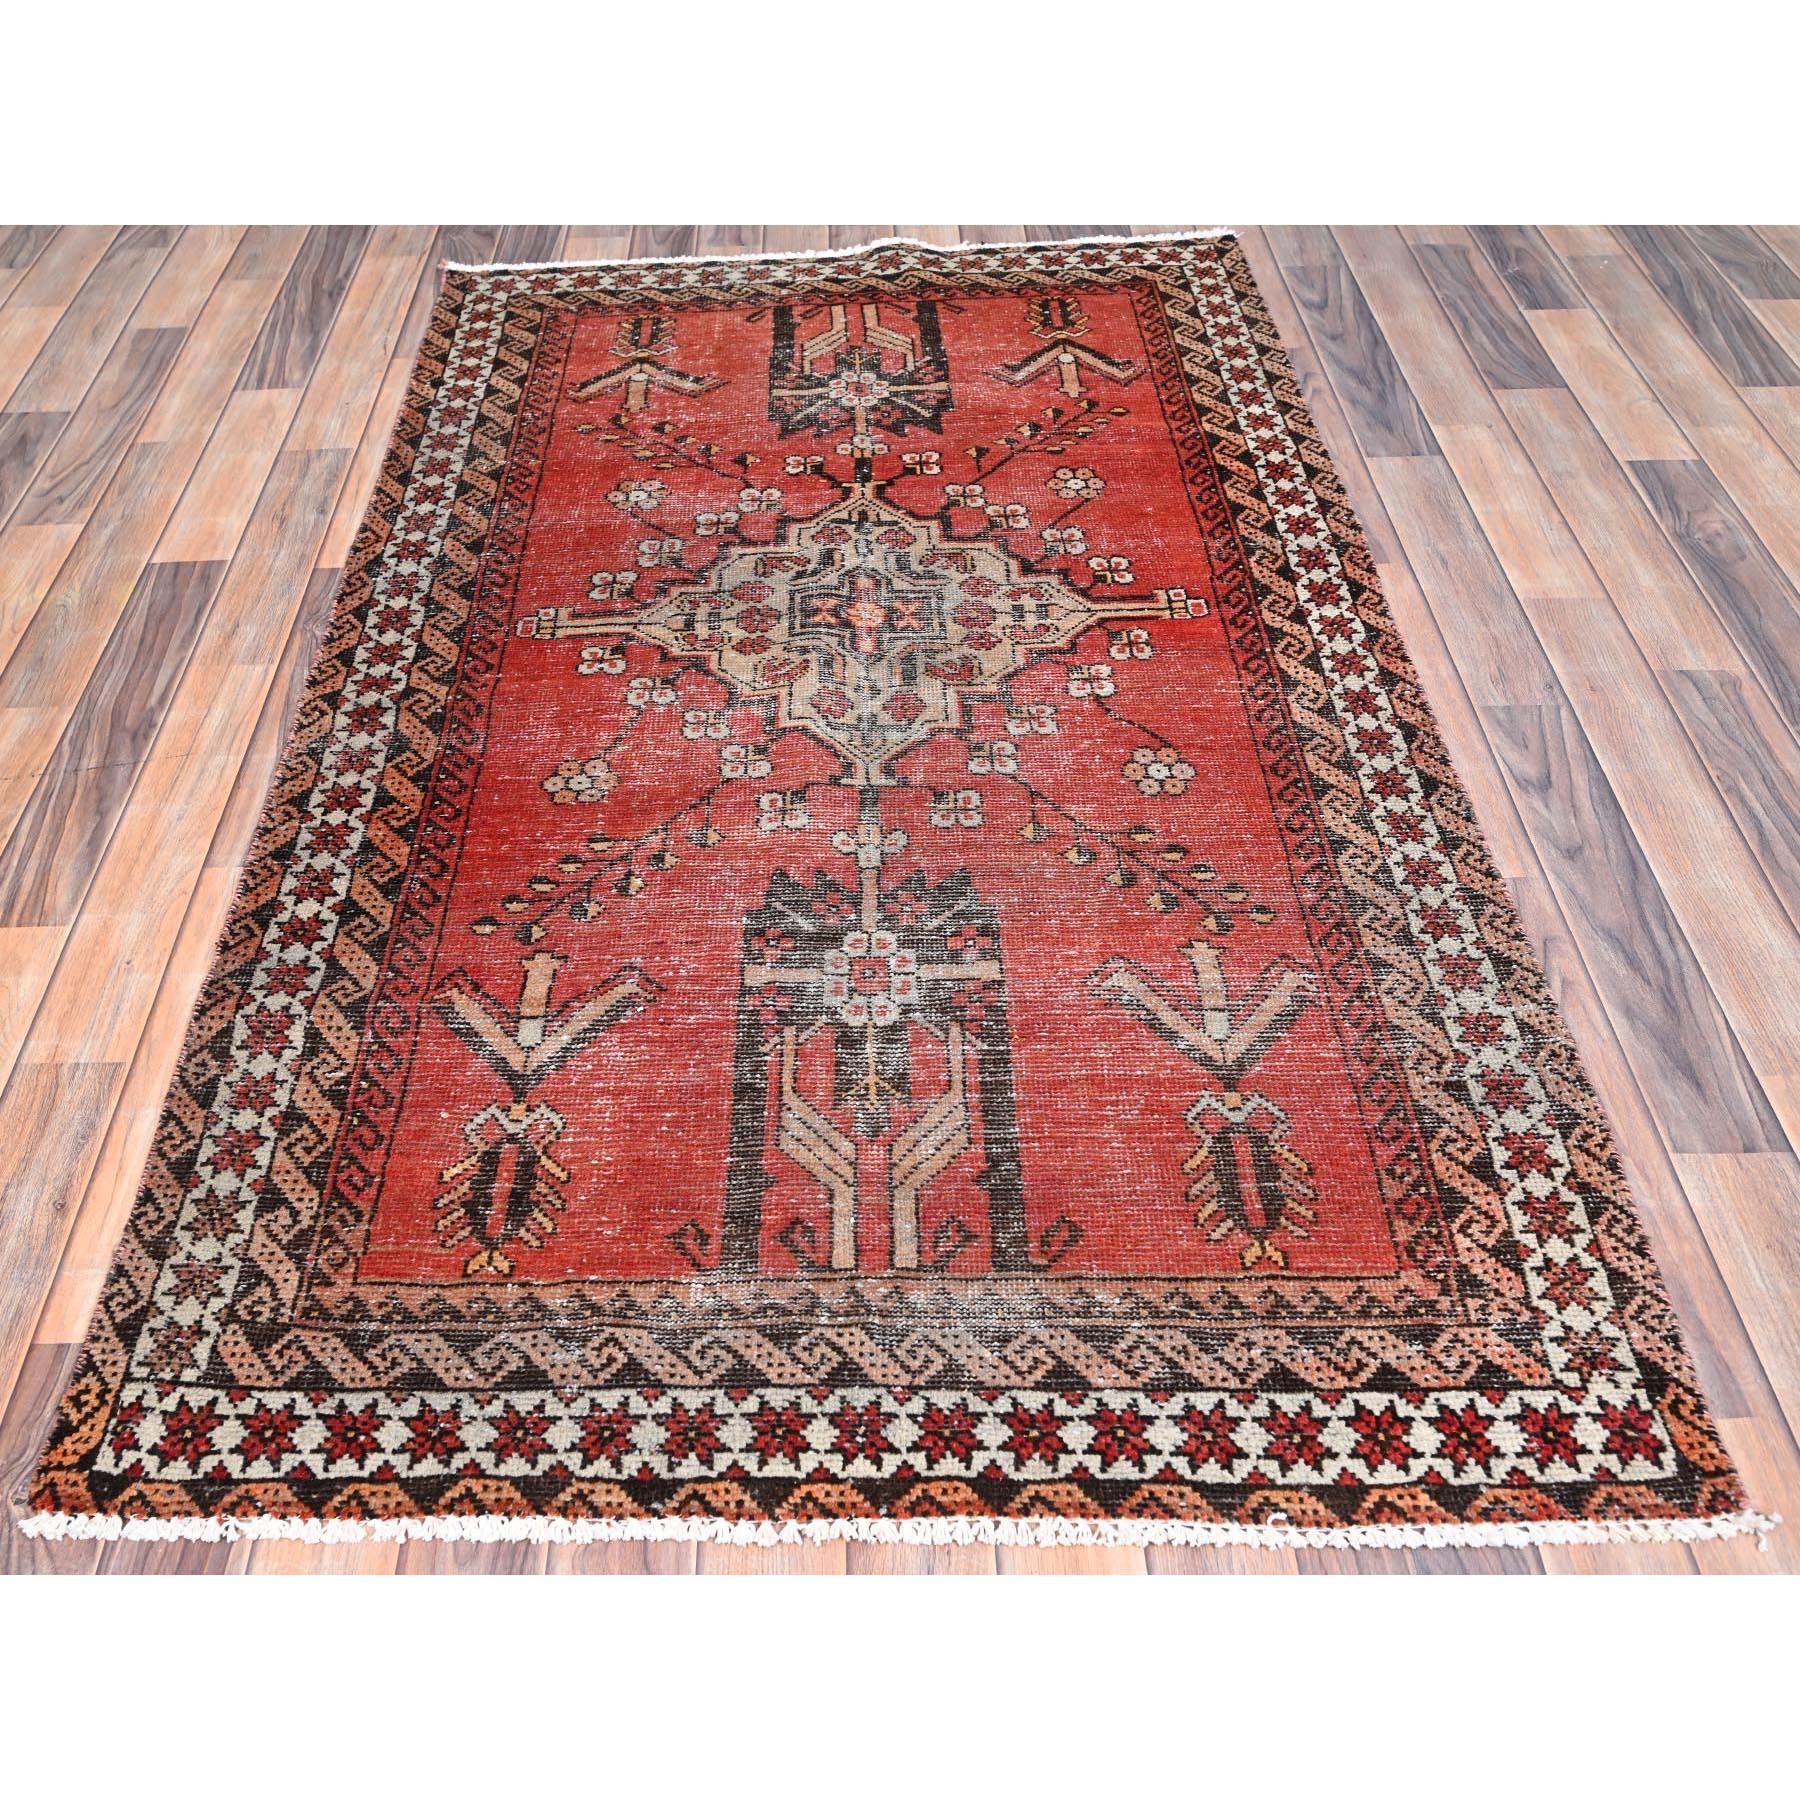 This fabulous Hand-Knotted carpet has been created and designed for extra strength and durability. This rug has been handcrafted for weeks in the traditional method that is used to make
Exact Rug Size in Feet and Inches : 3'9